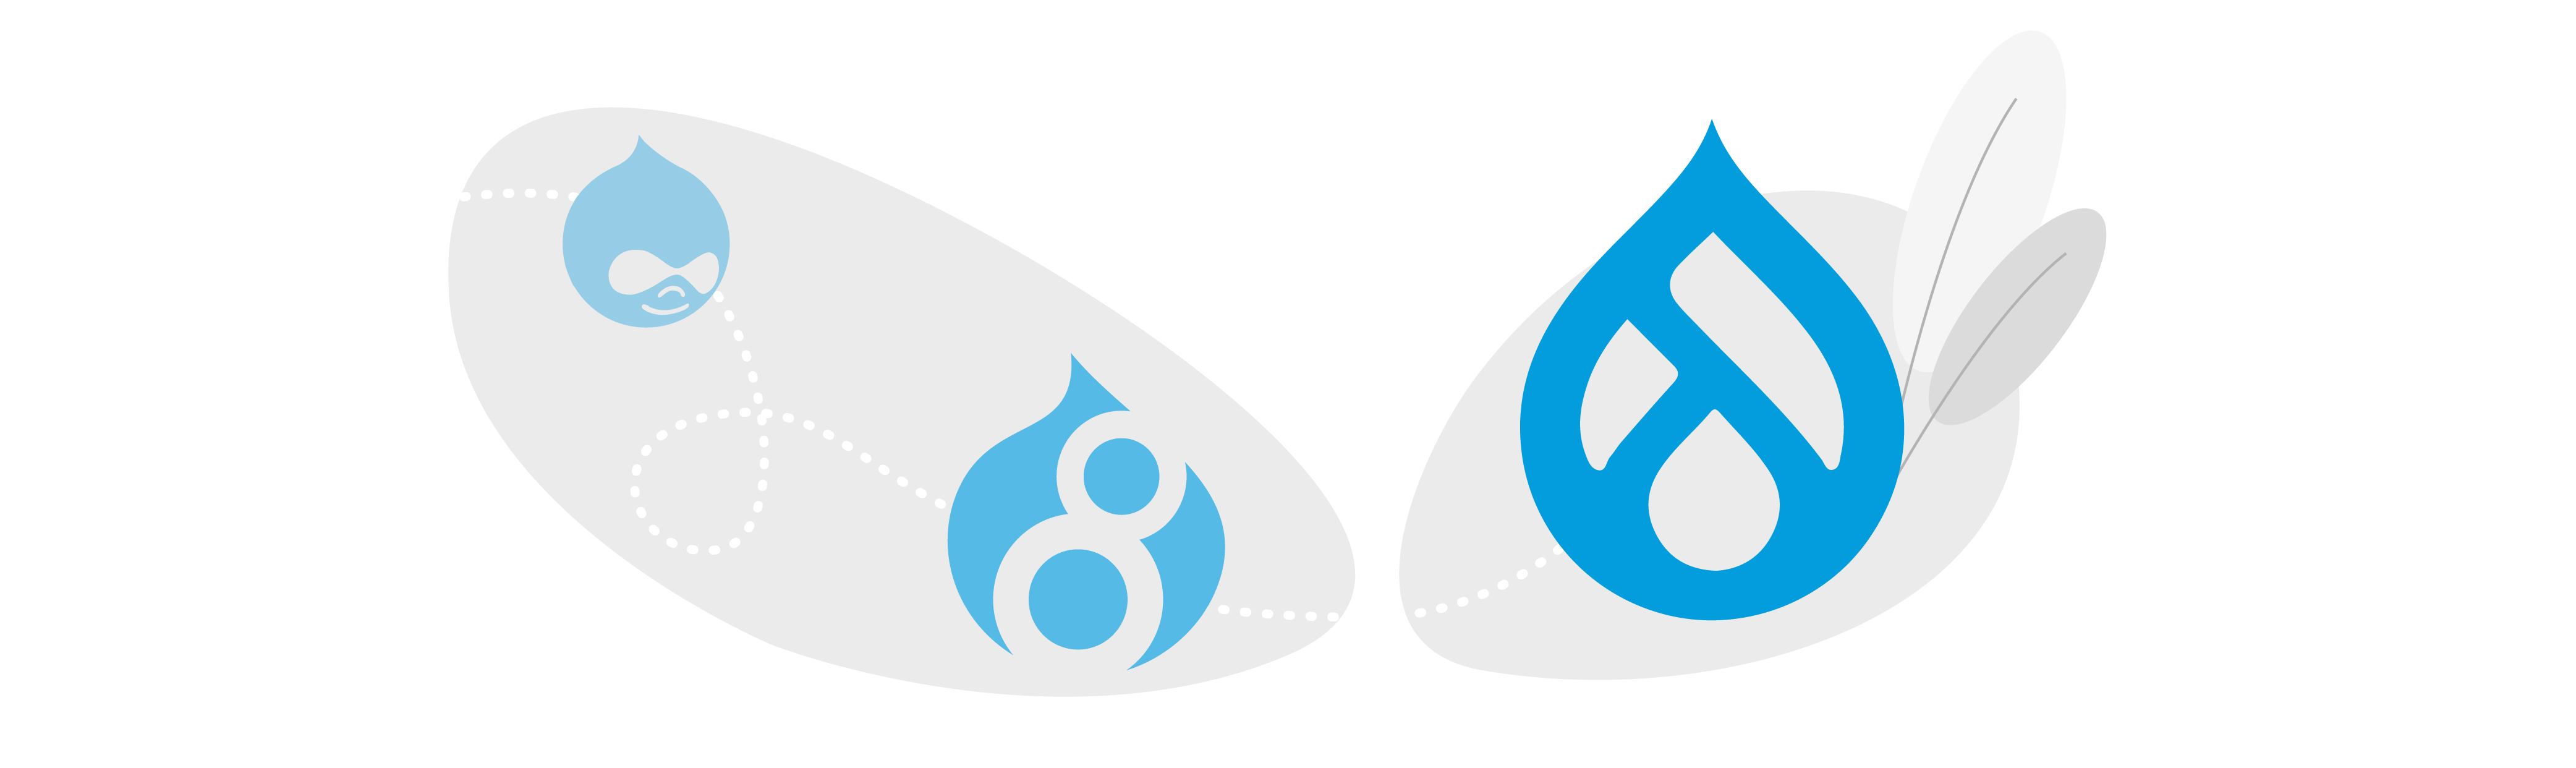 upgrade to Drupal 9 services